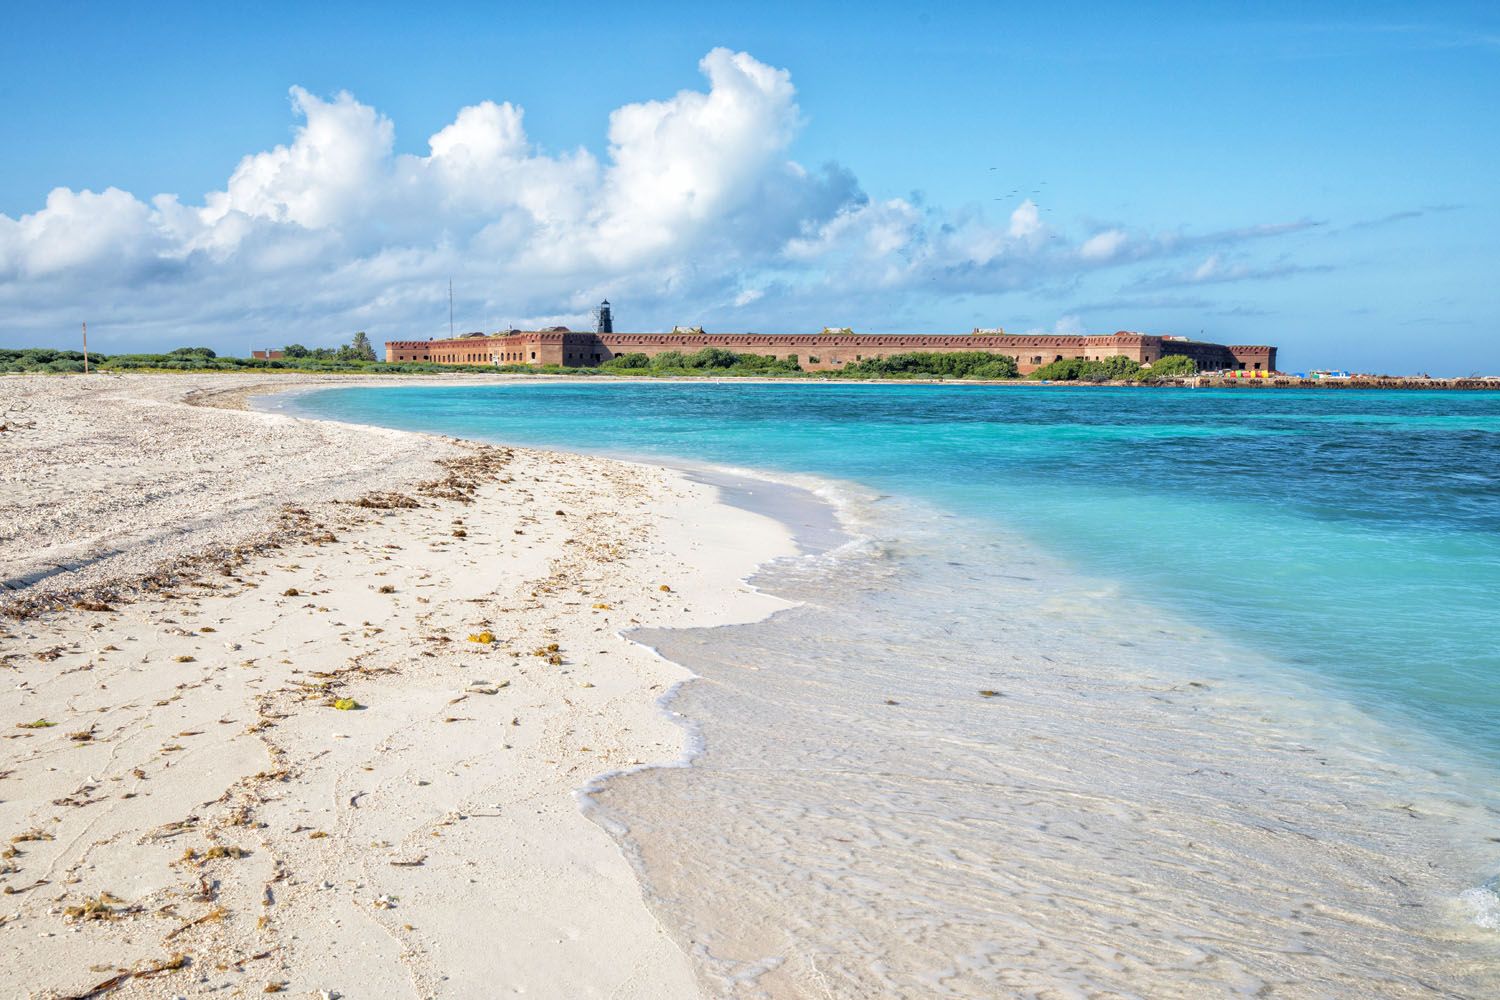 Dry Tortugas National Park Guide